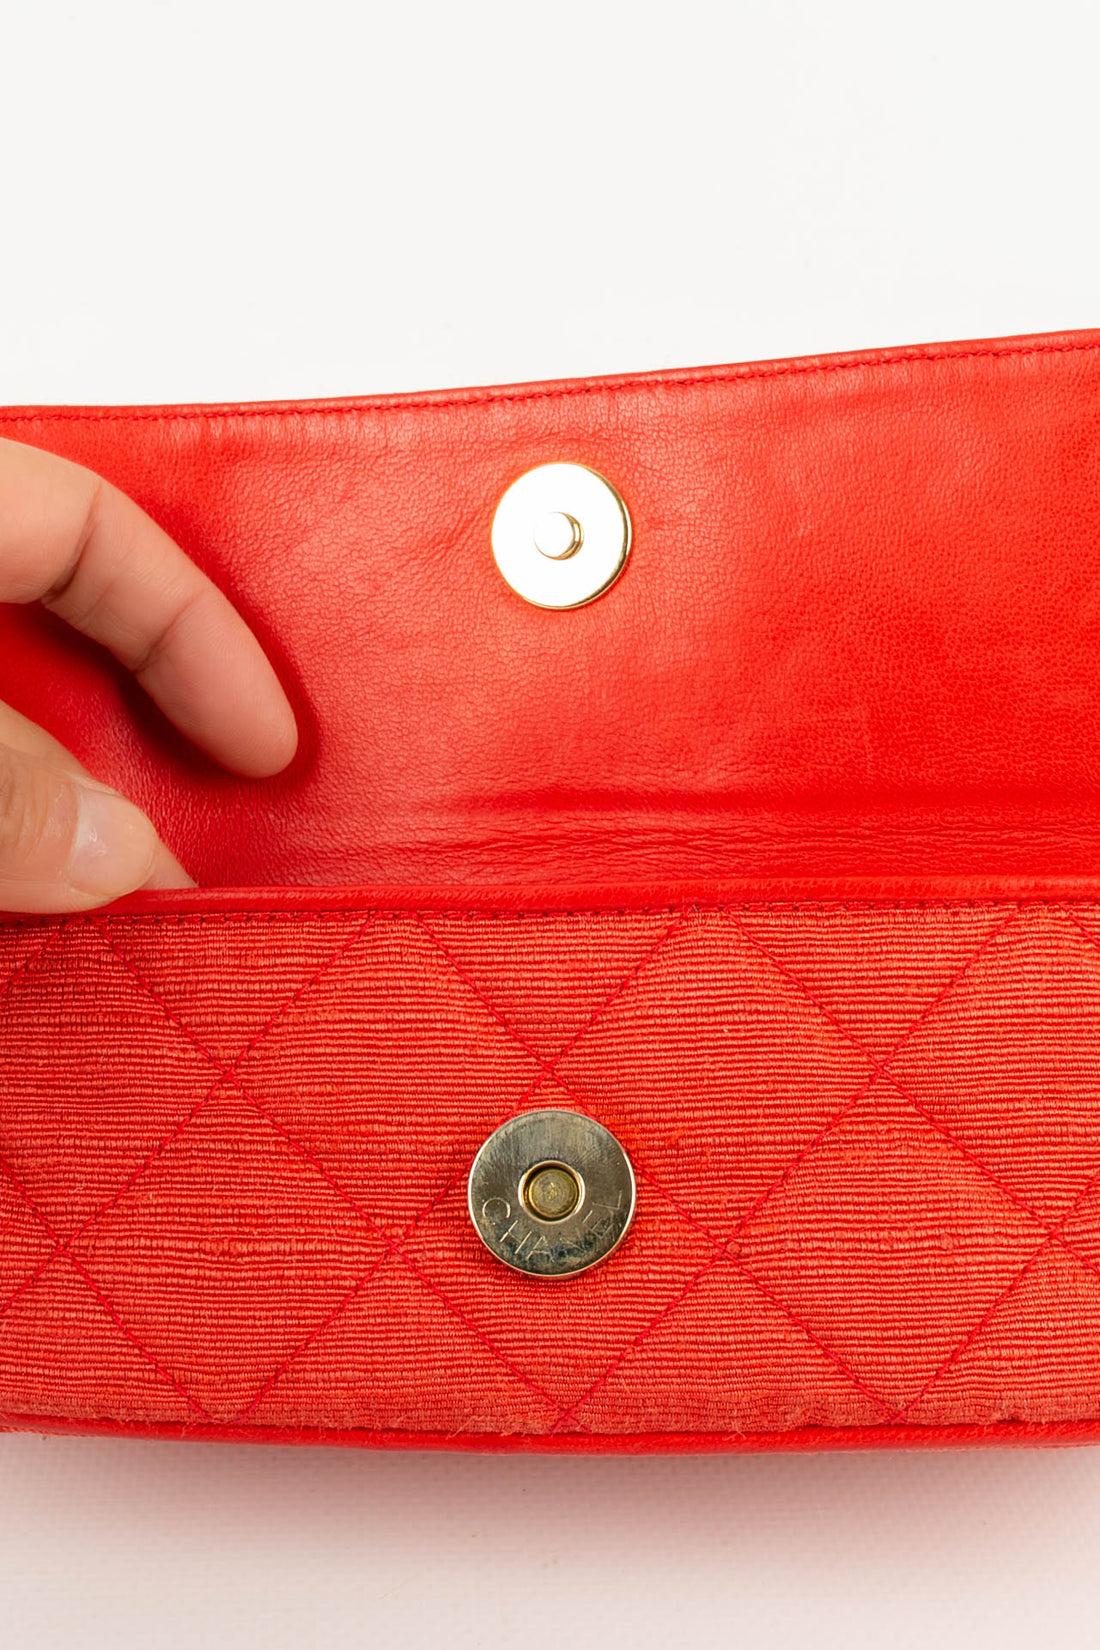 Chanel Red Quilted Cotton Bag, 1989/1991 4